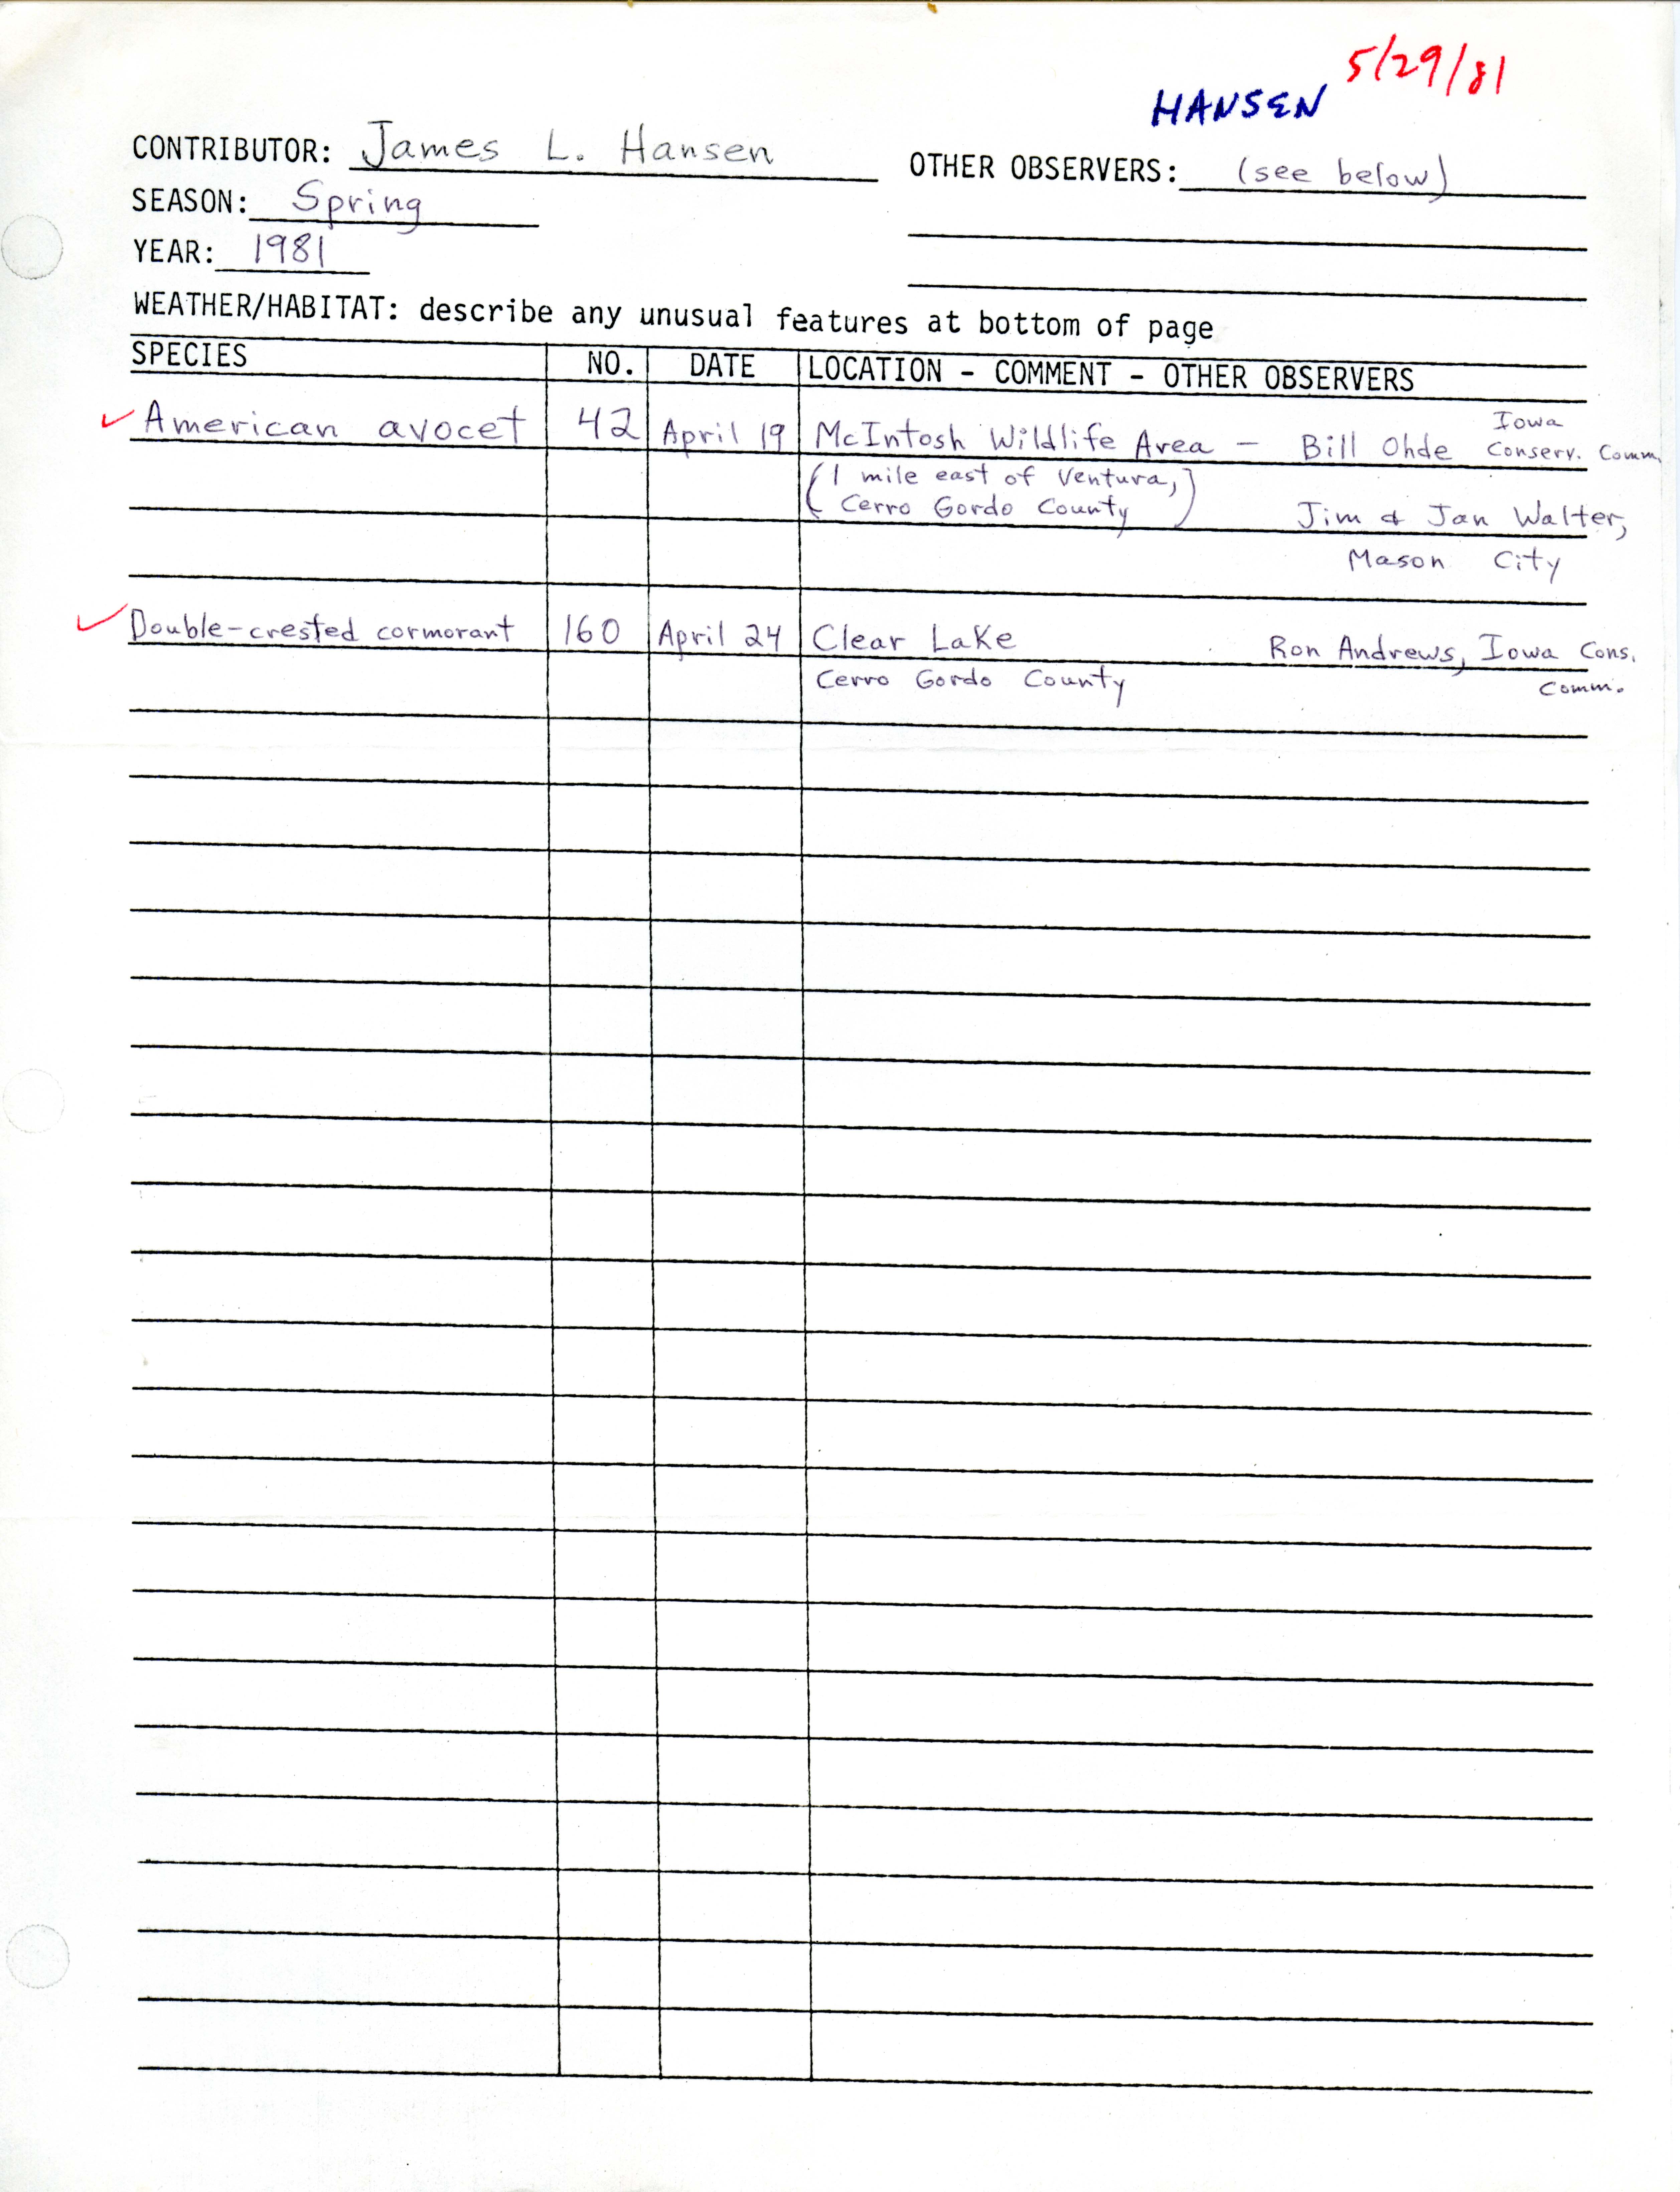 Annotated bird sighting list for spring 1981 compiled by James Hansen